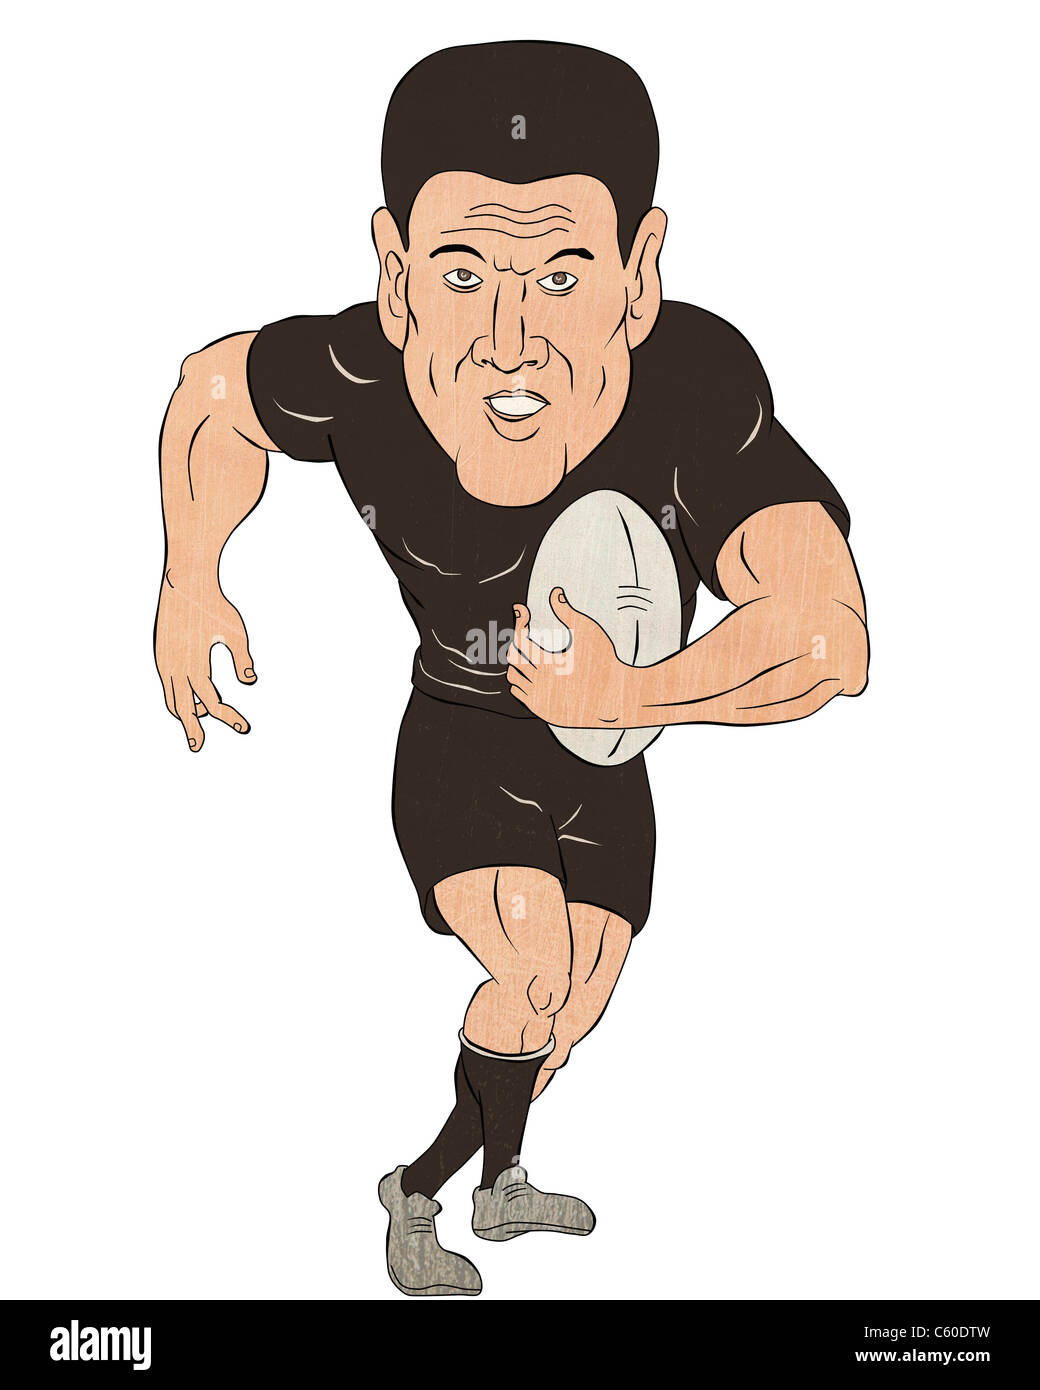 cartoon illustration of a Rugby player running with ball isolated on white background Stock Photo